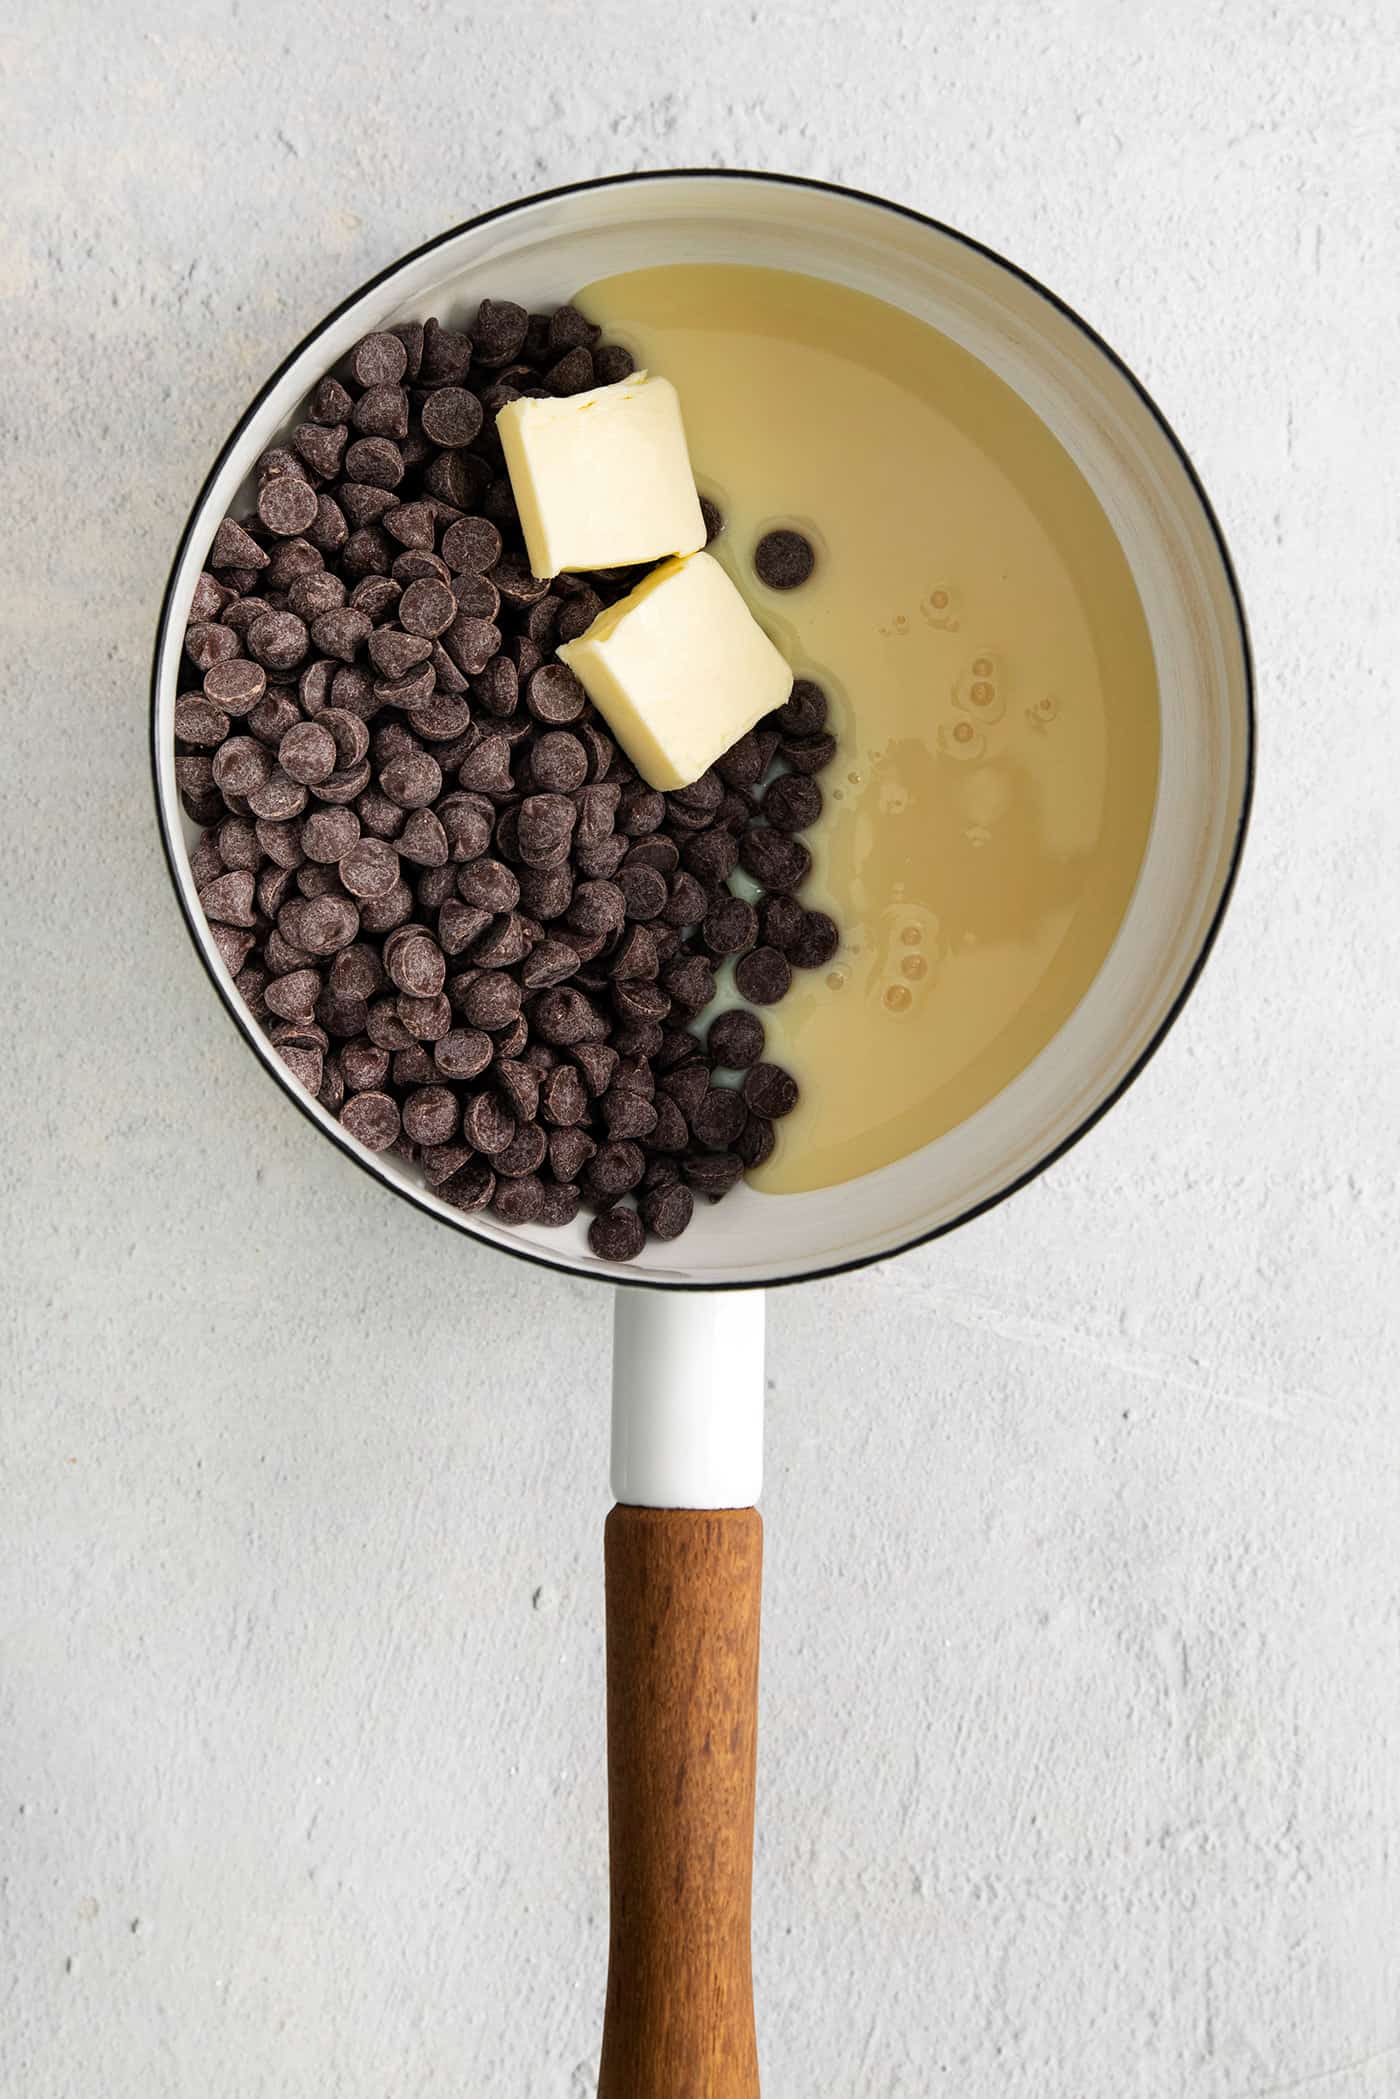 Chocolate chips, condensed milk, and butter in a saucepan